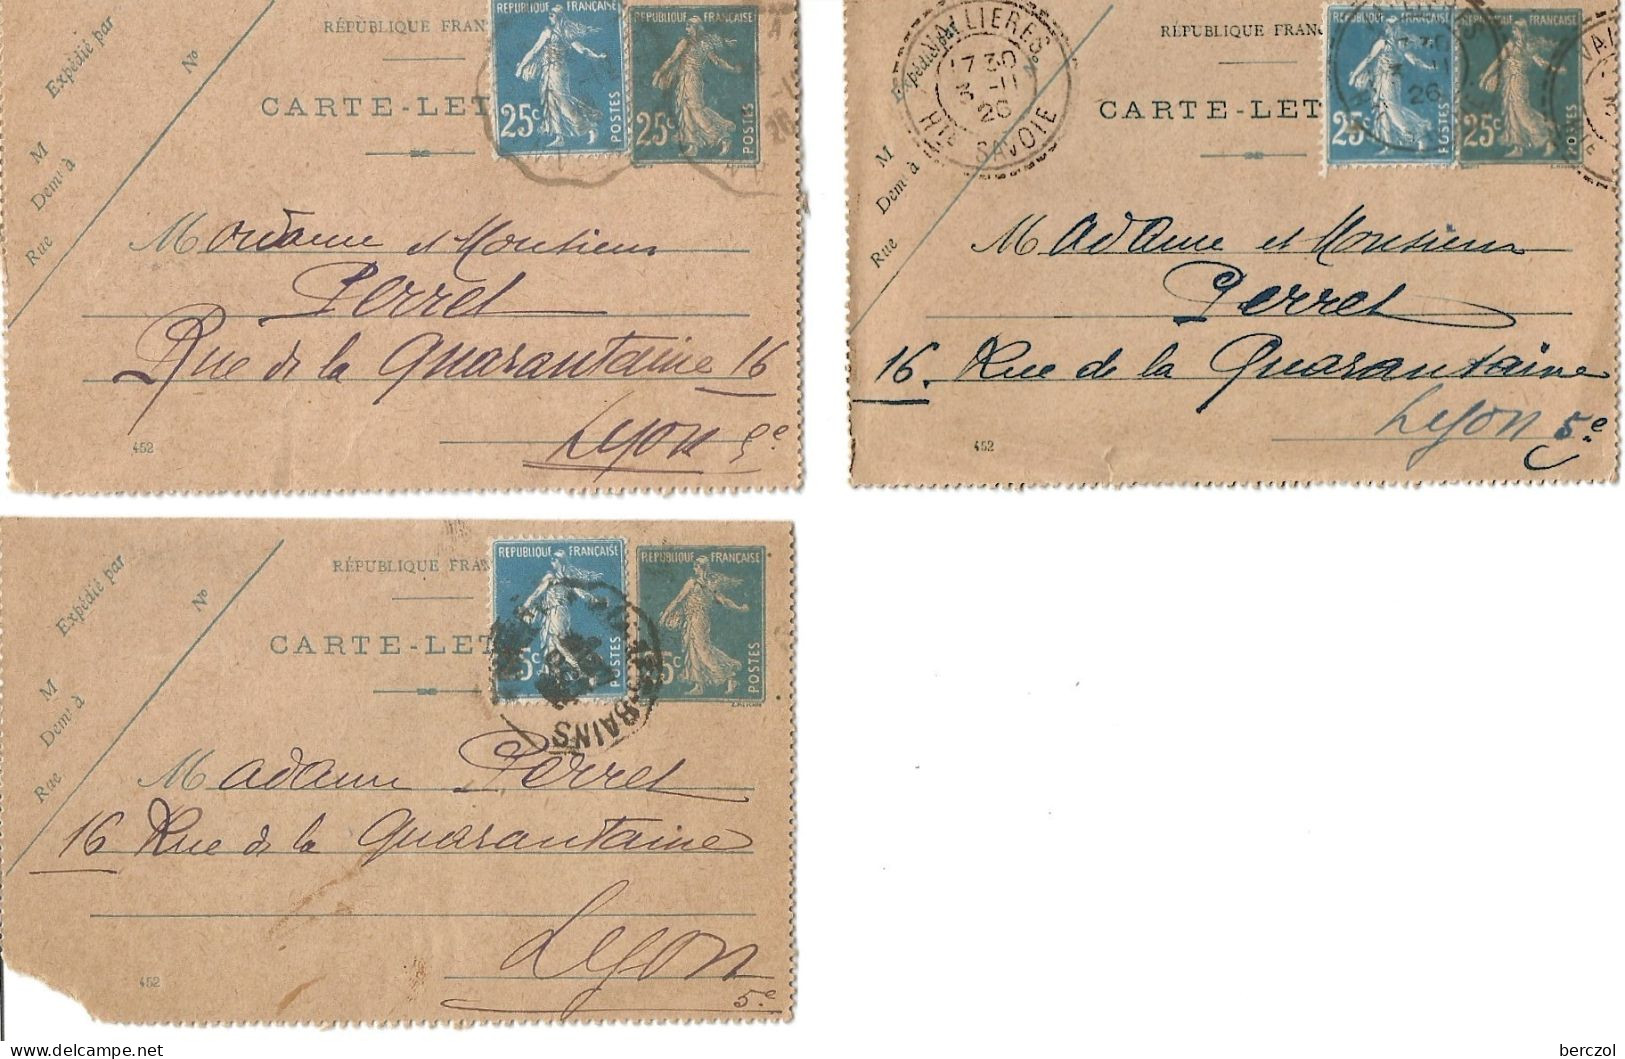 FRANCE ANNEE1907/1939 LOT DE 3 ENTIERS TYPE SEMEUSE CAMEE N° 140 CL1  TB DATE : 452  - Letter Cards